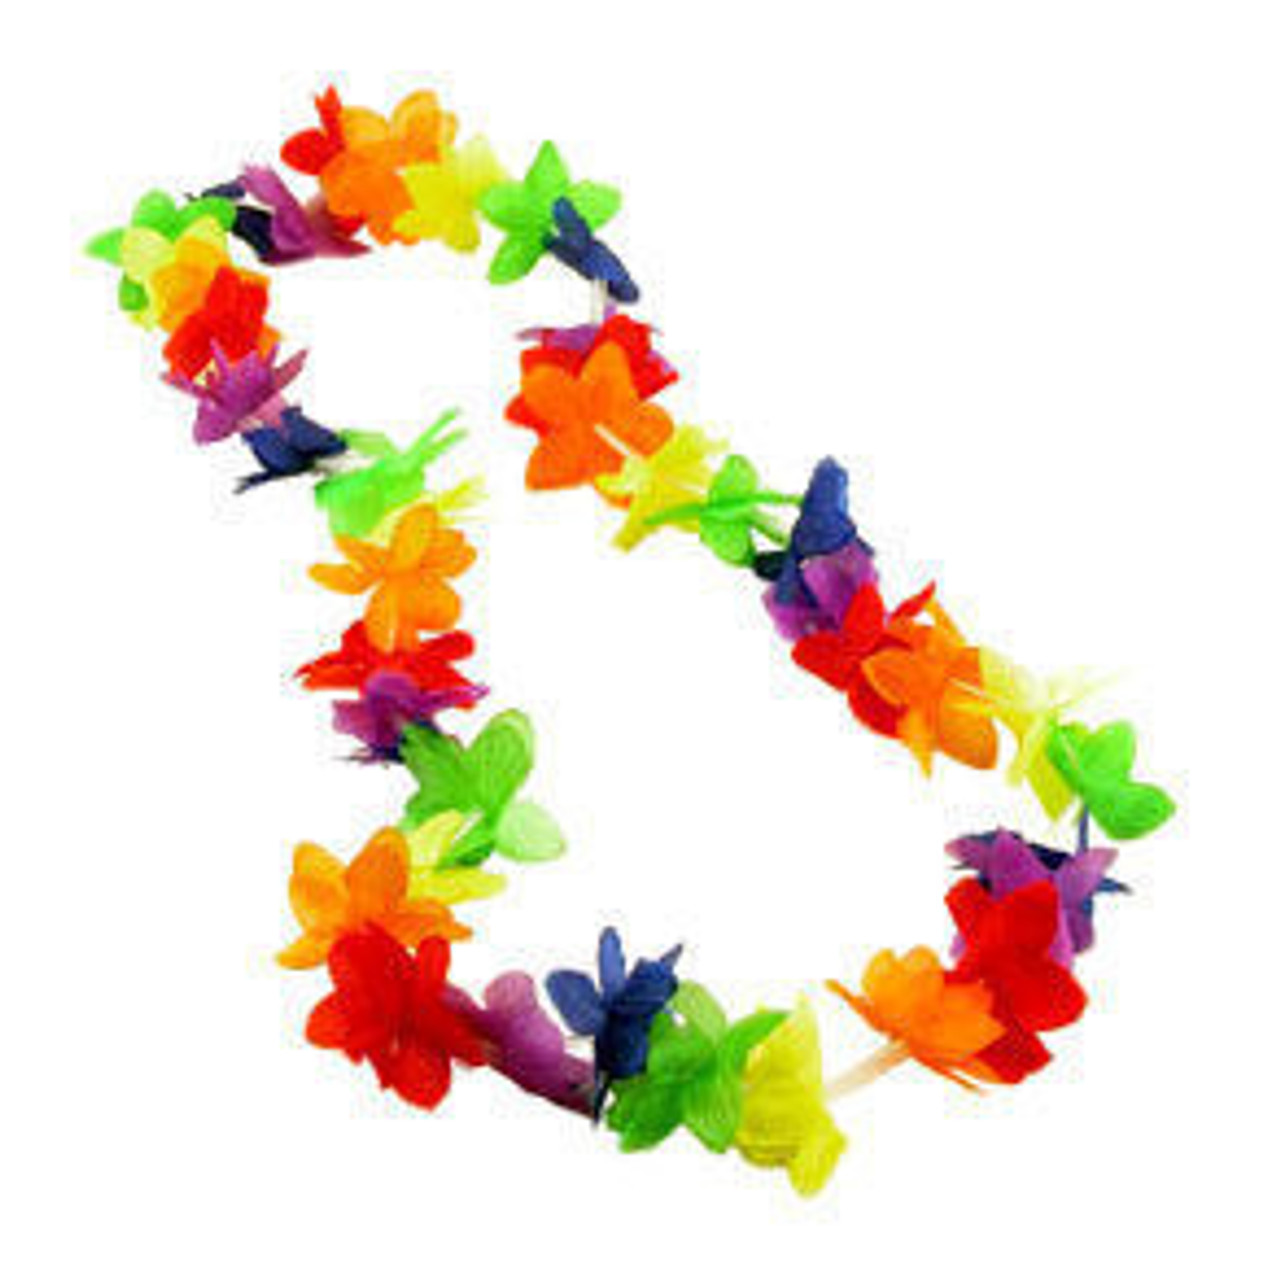 Dyed Rainbow Orchid Lei (Single)